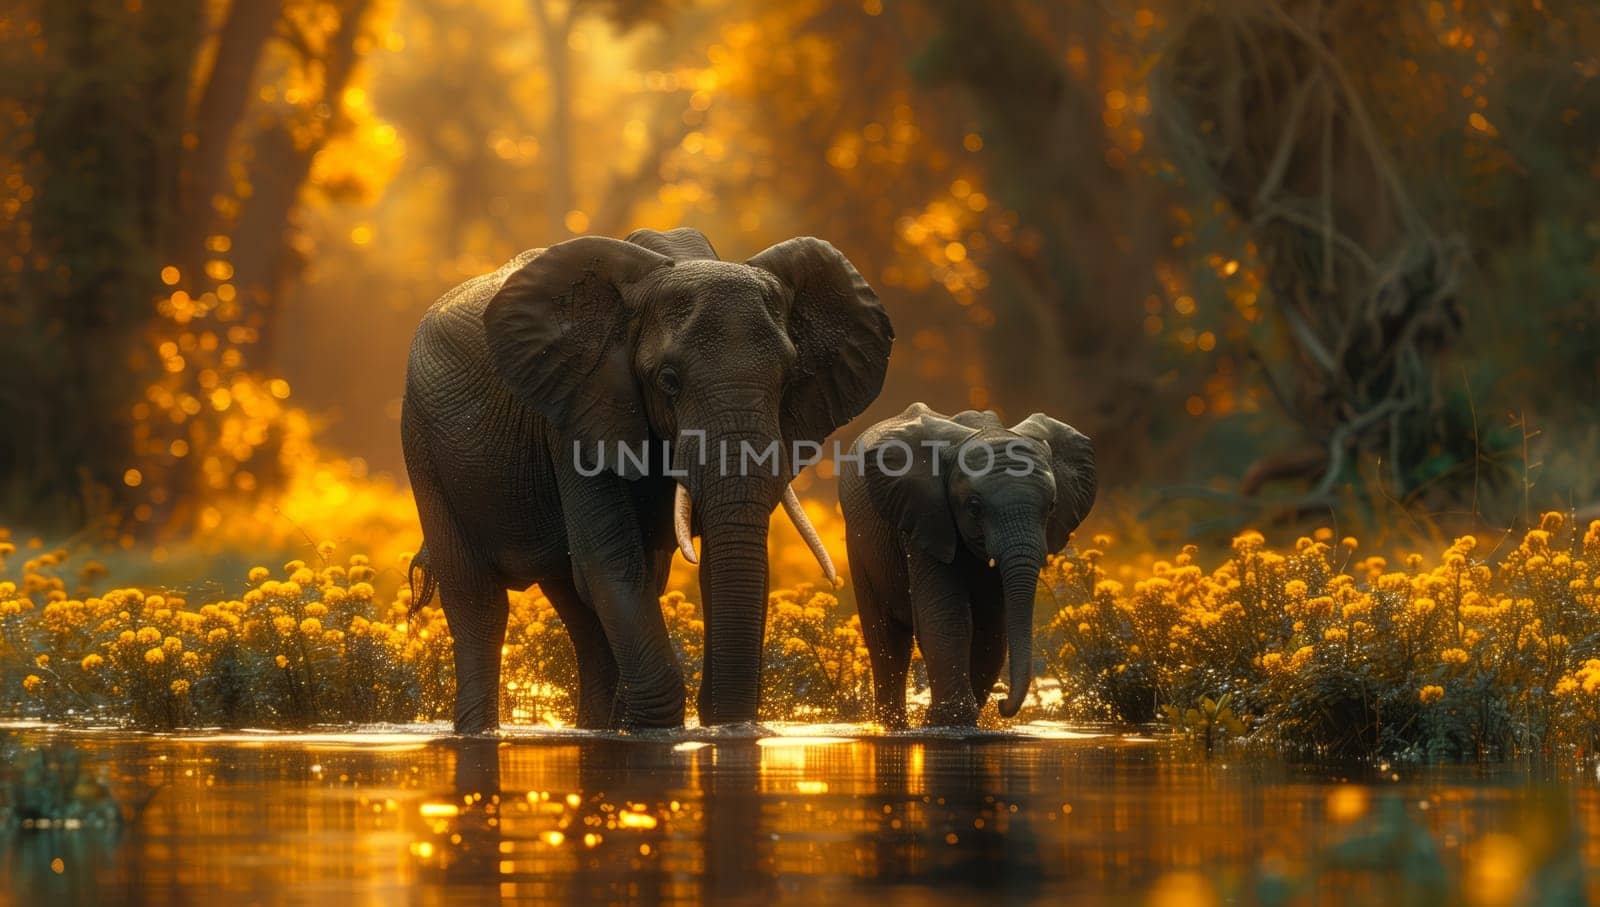 Two elephants, majestic terrestrial animals, are depicted standing in a serene body of water in a beautiful natural landscape painting